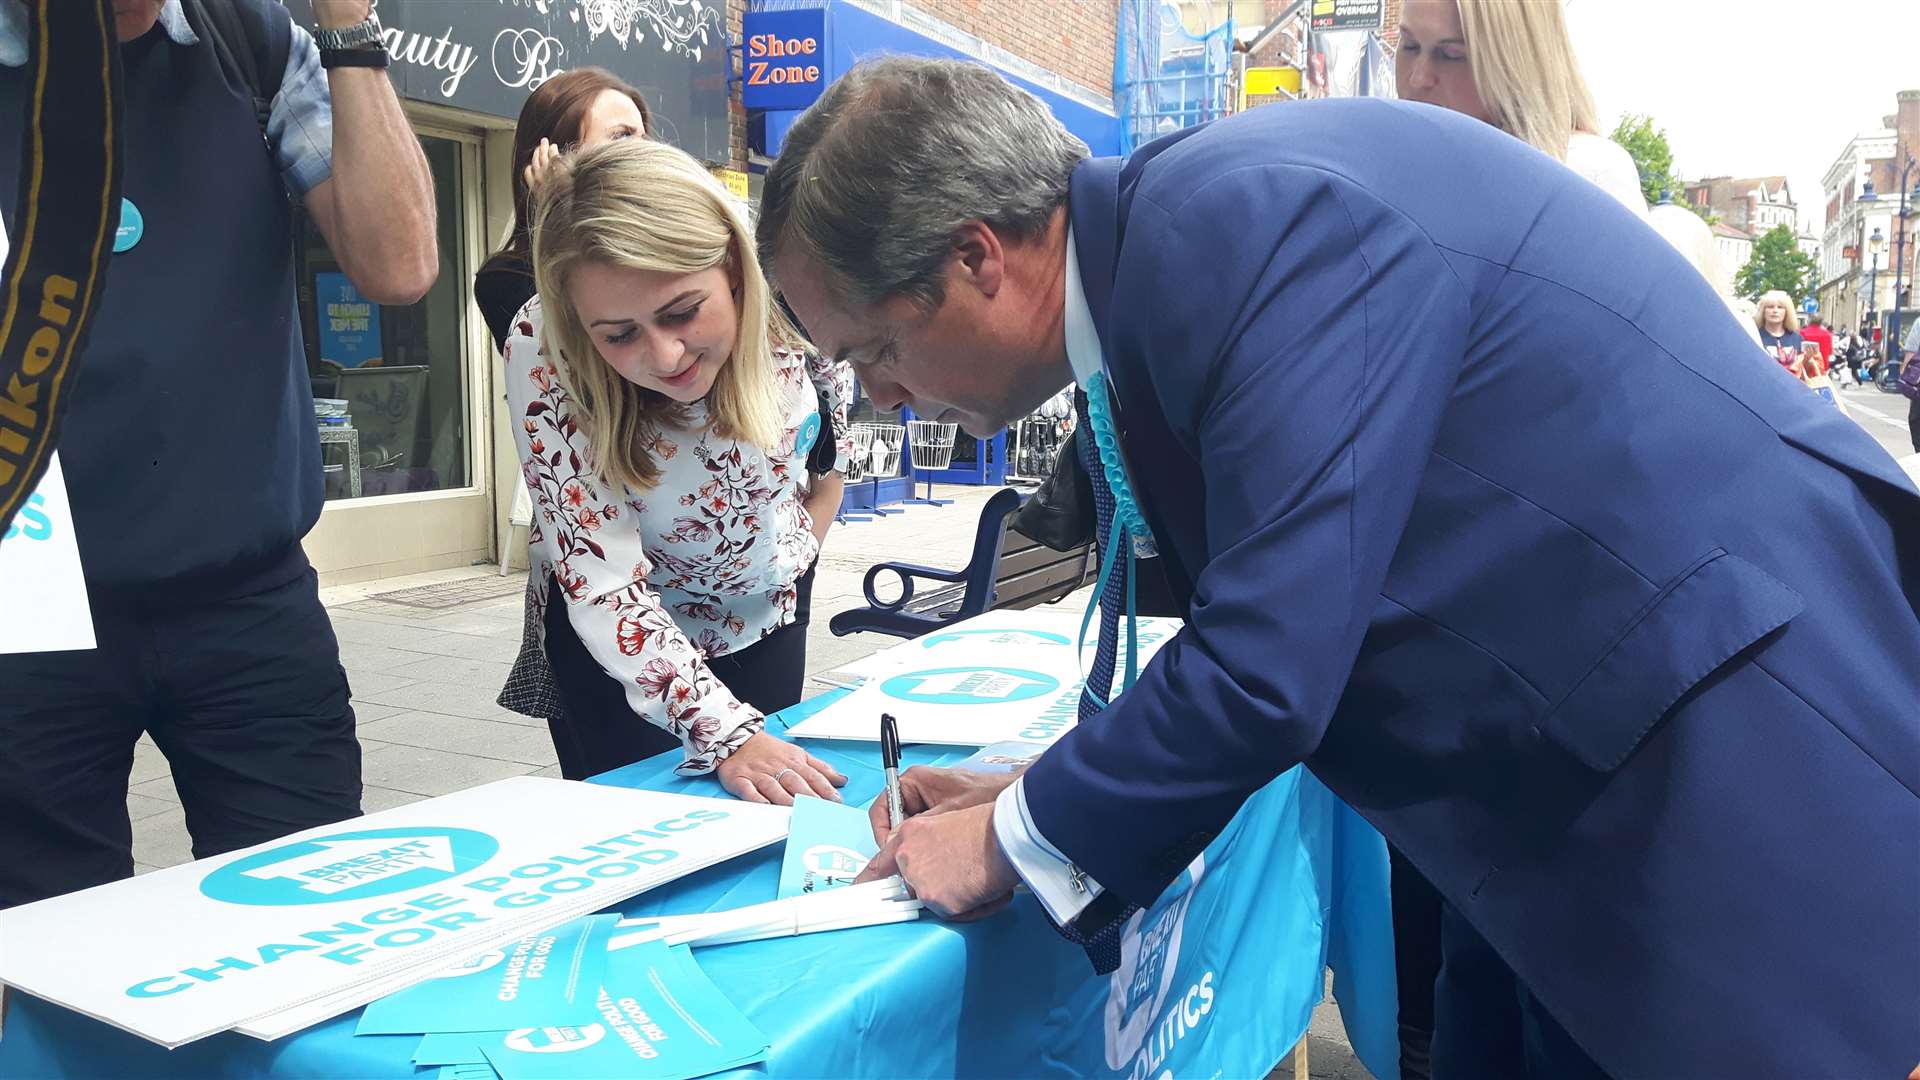 Nigel Farage signs an autograph - but remains at the cheaper end of the market